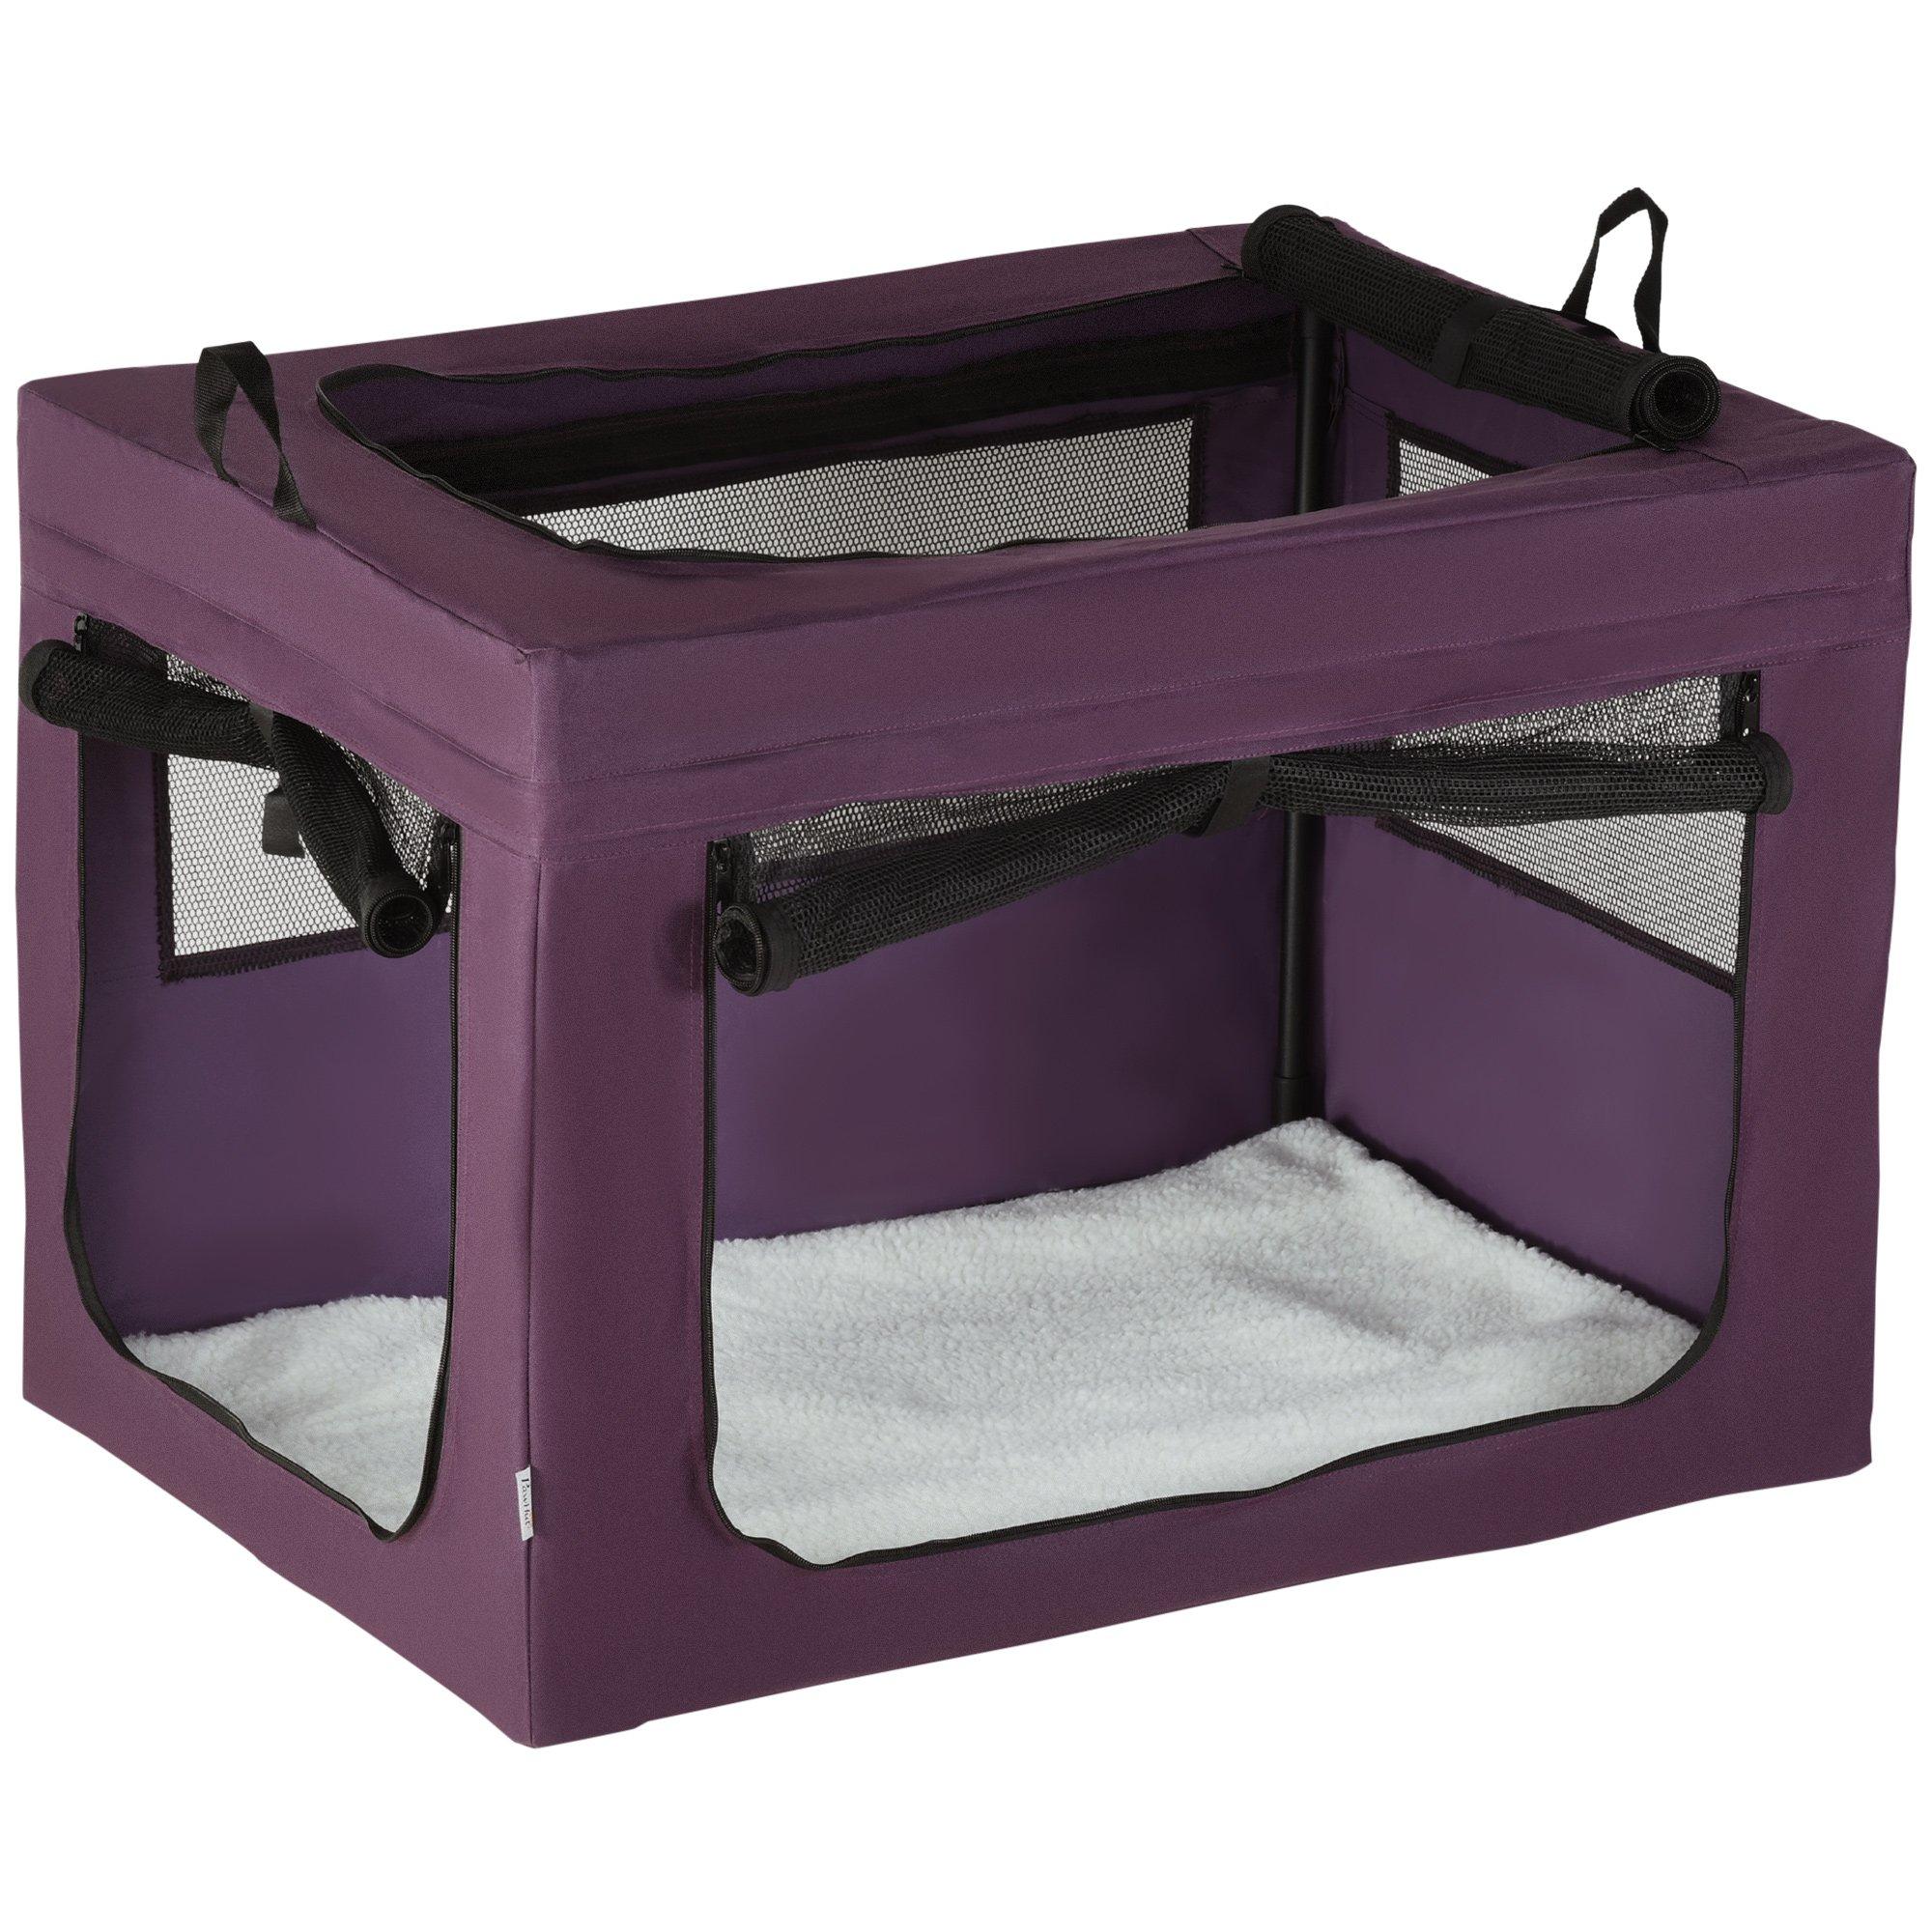 90cm Pet Carrier, Soft Side Pet Travel Crate with Mat for Large Dogs